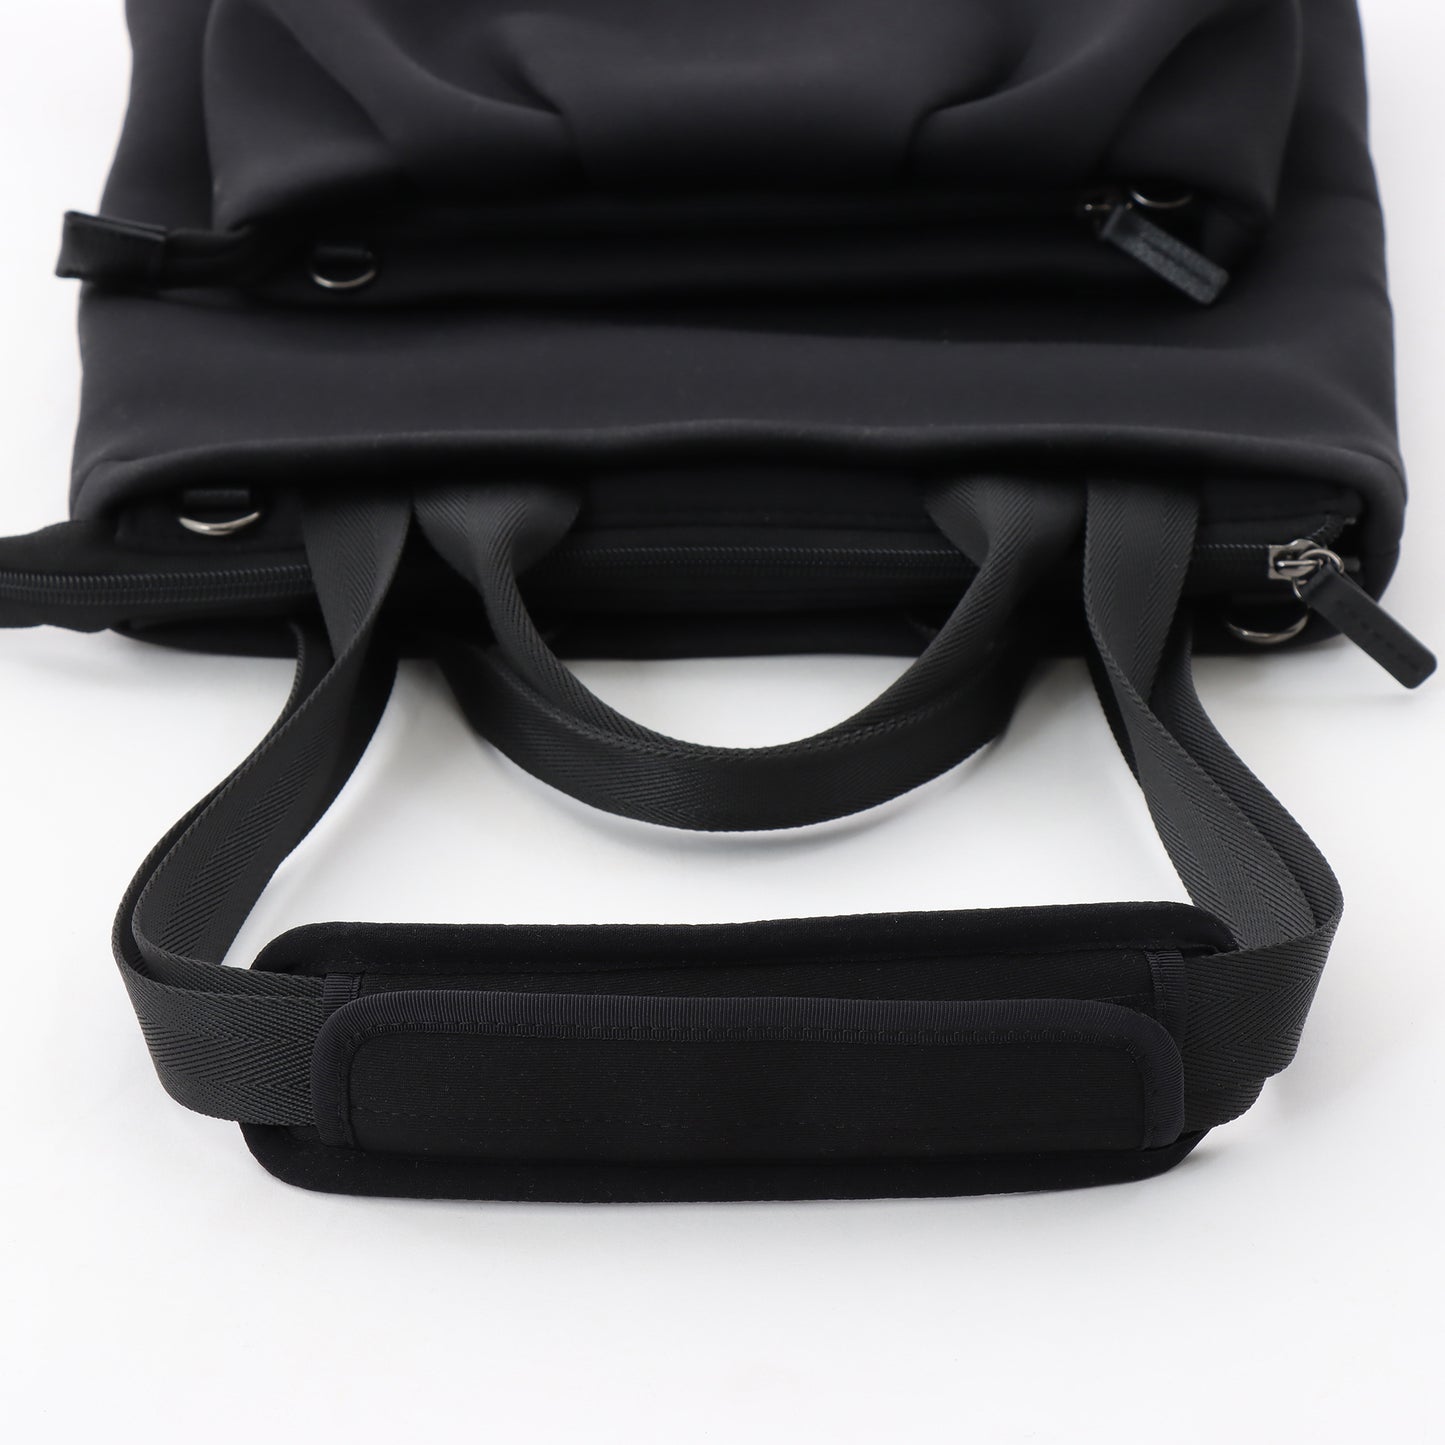 "One and Only" Laptop Bag - PERC